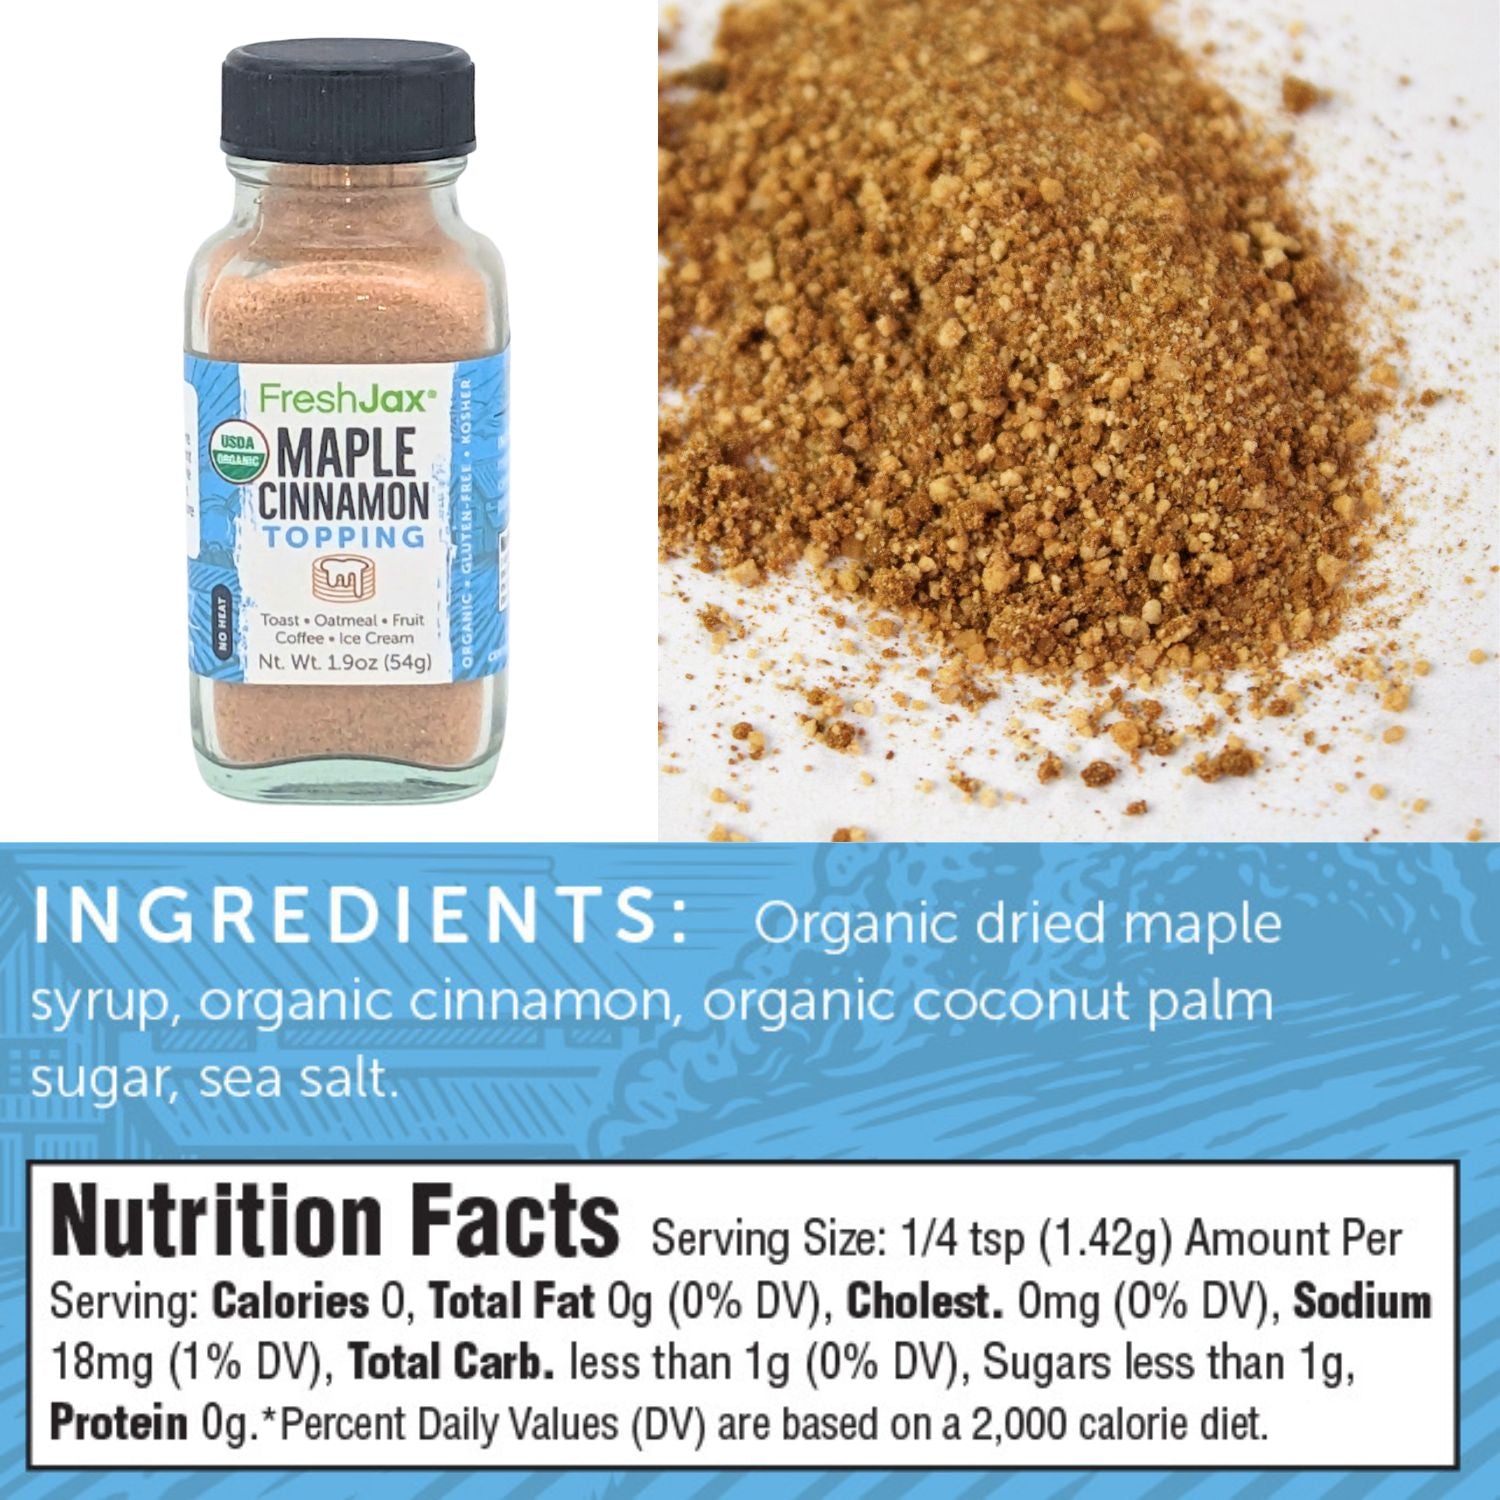 FreshJax Organic Spices Maple Cinnamon Sampler Ingredients and Nutritional Information